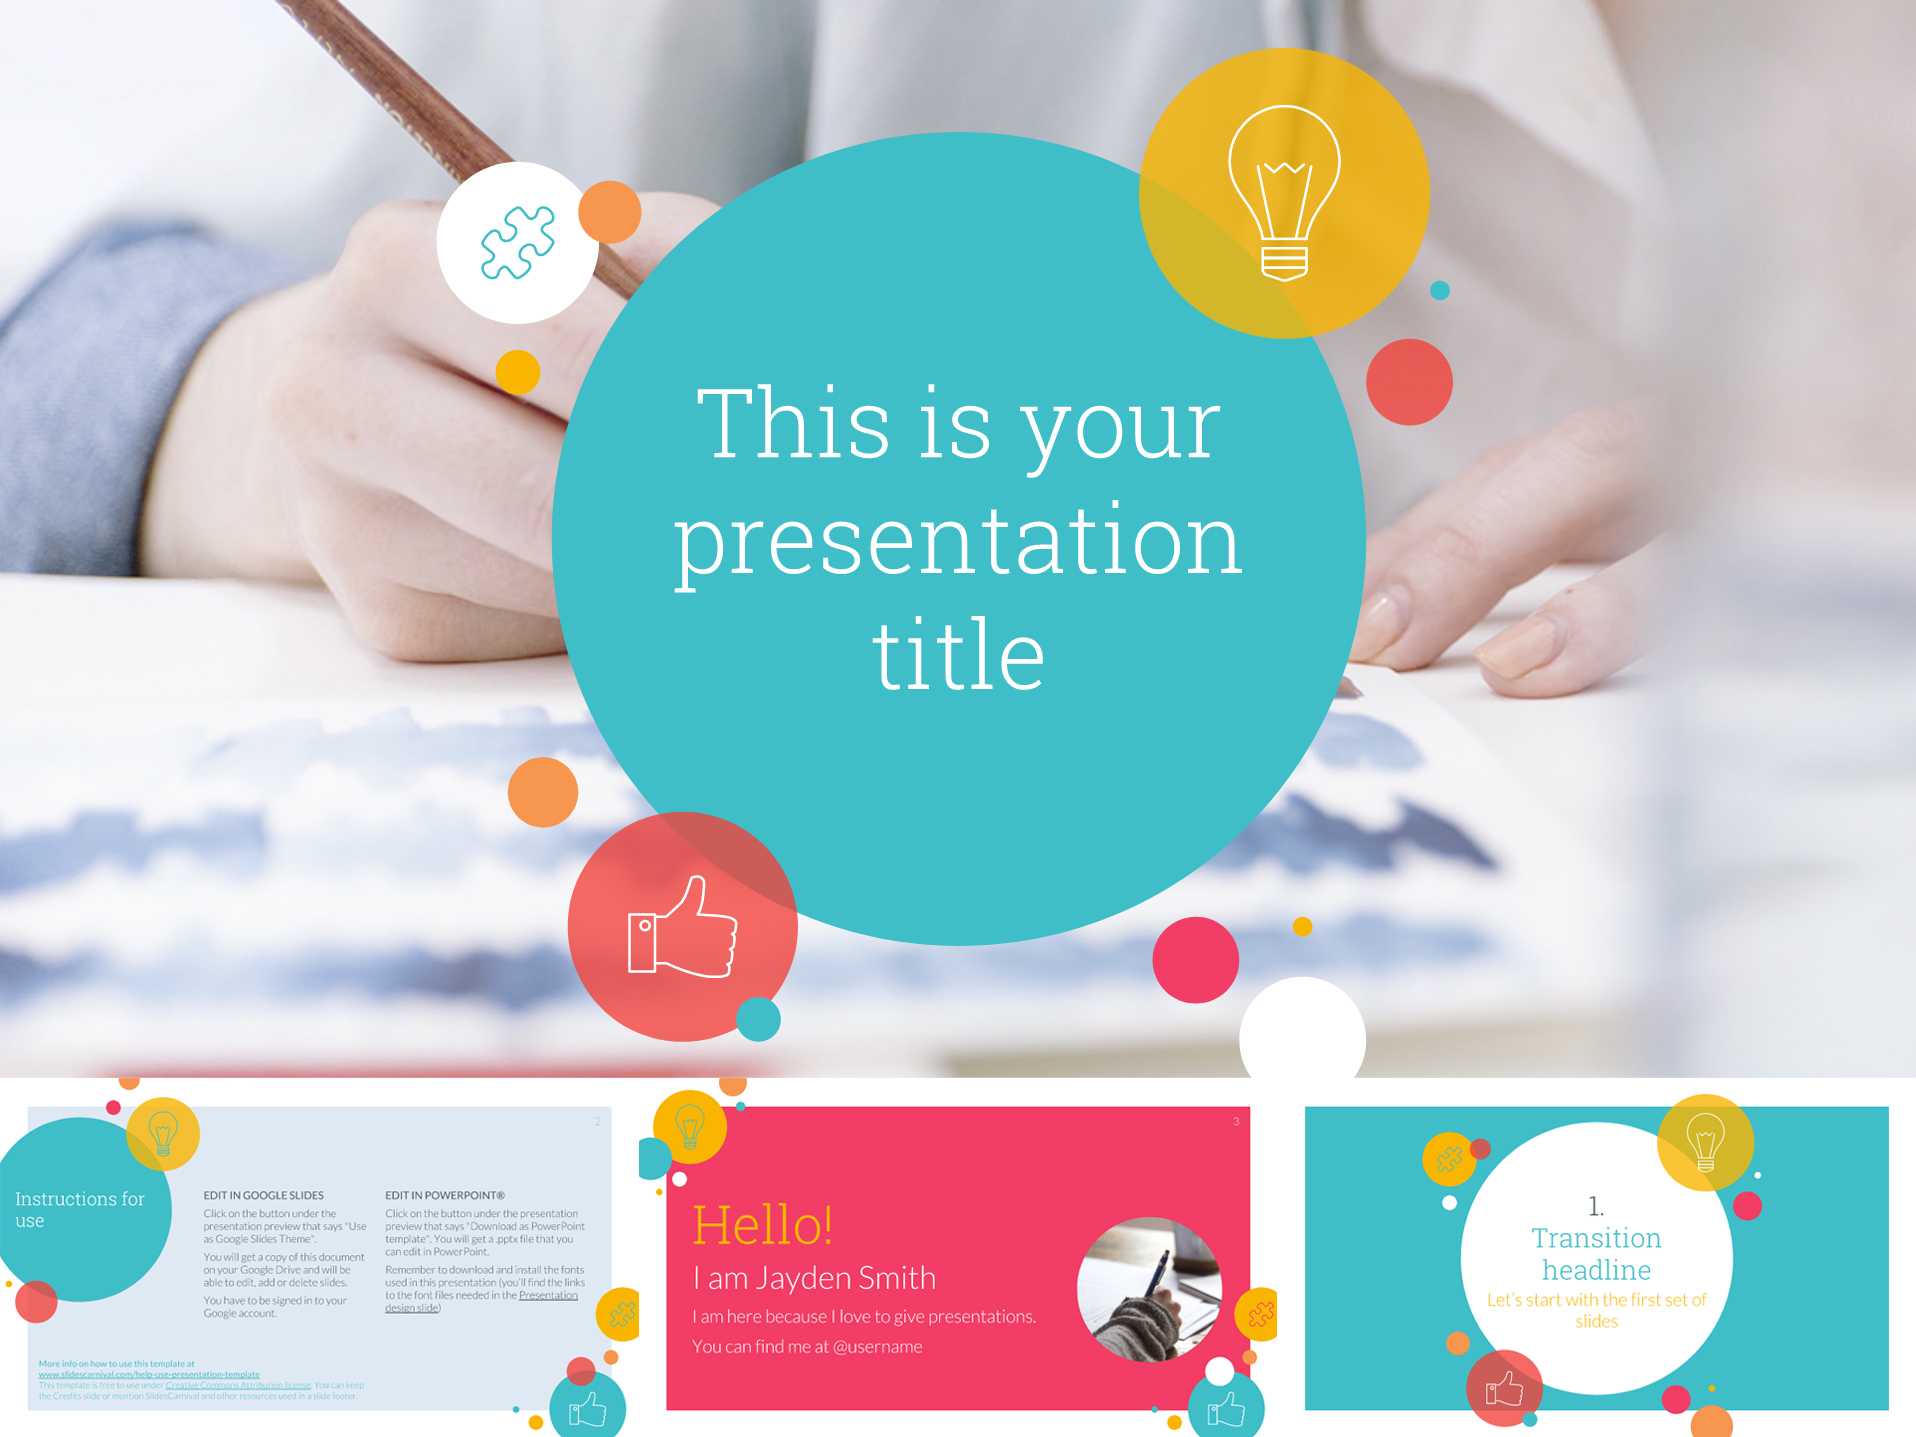 30 Free Google Slides Templates For Your Next Presentation With Fun Powerpoint Templates Free Download